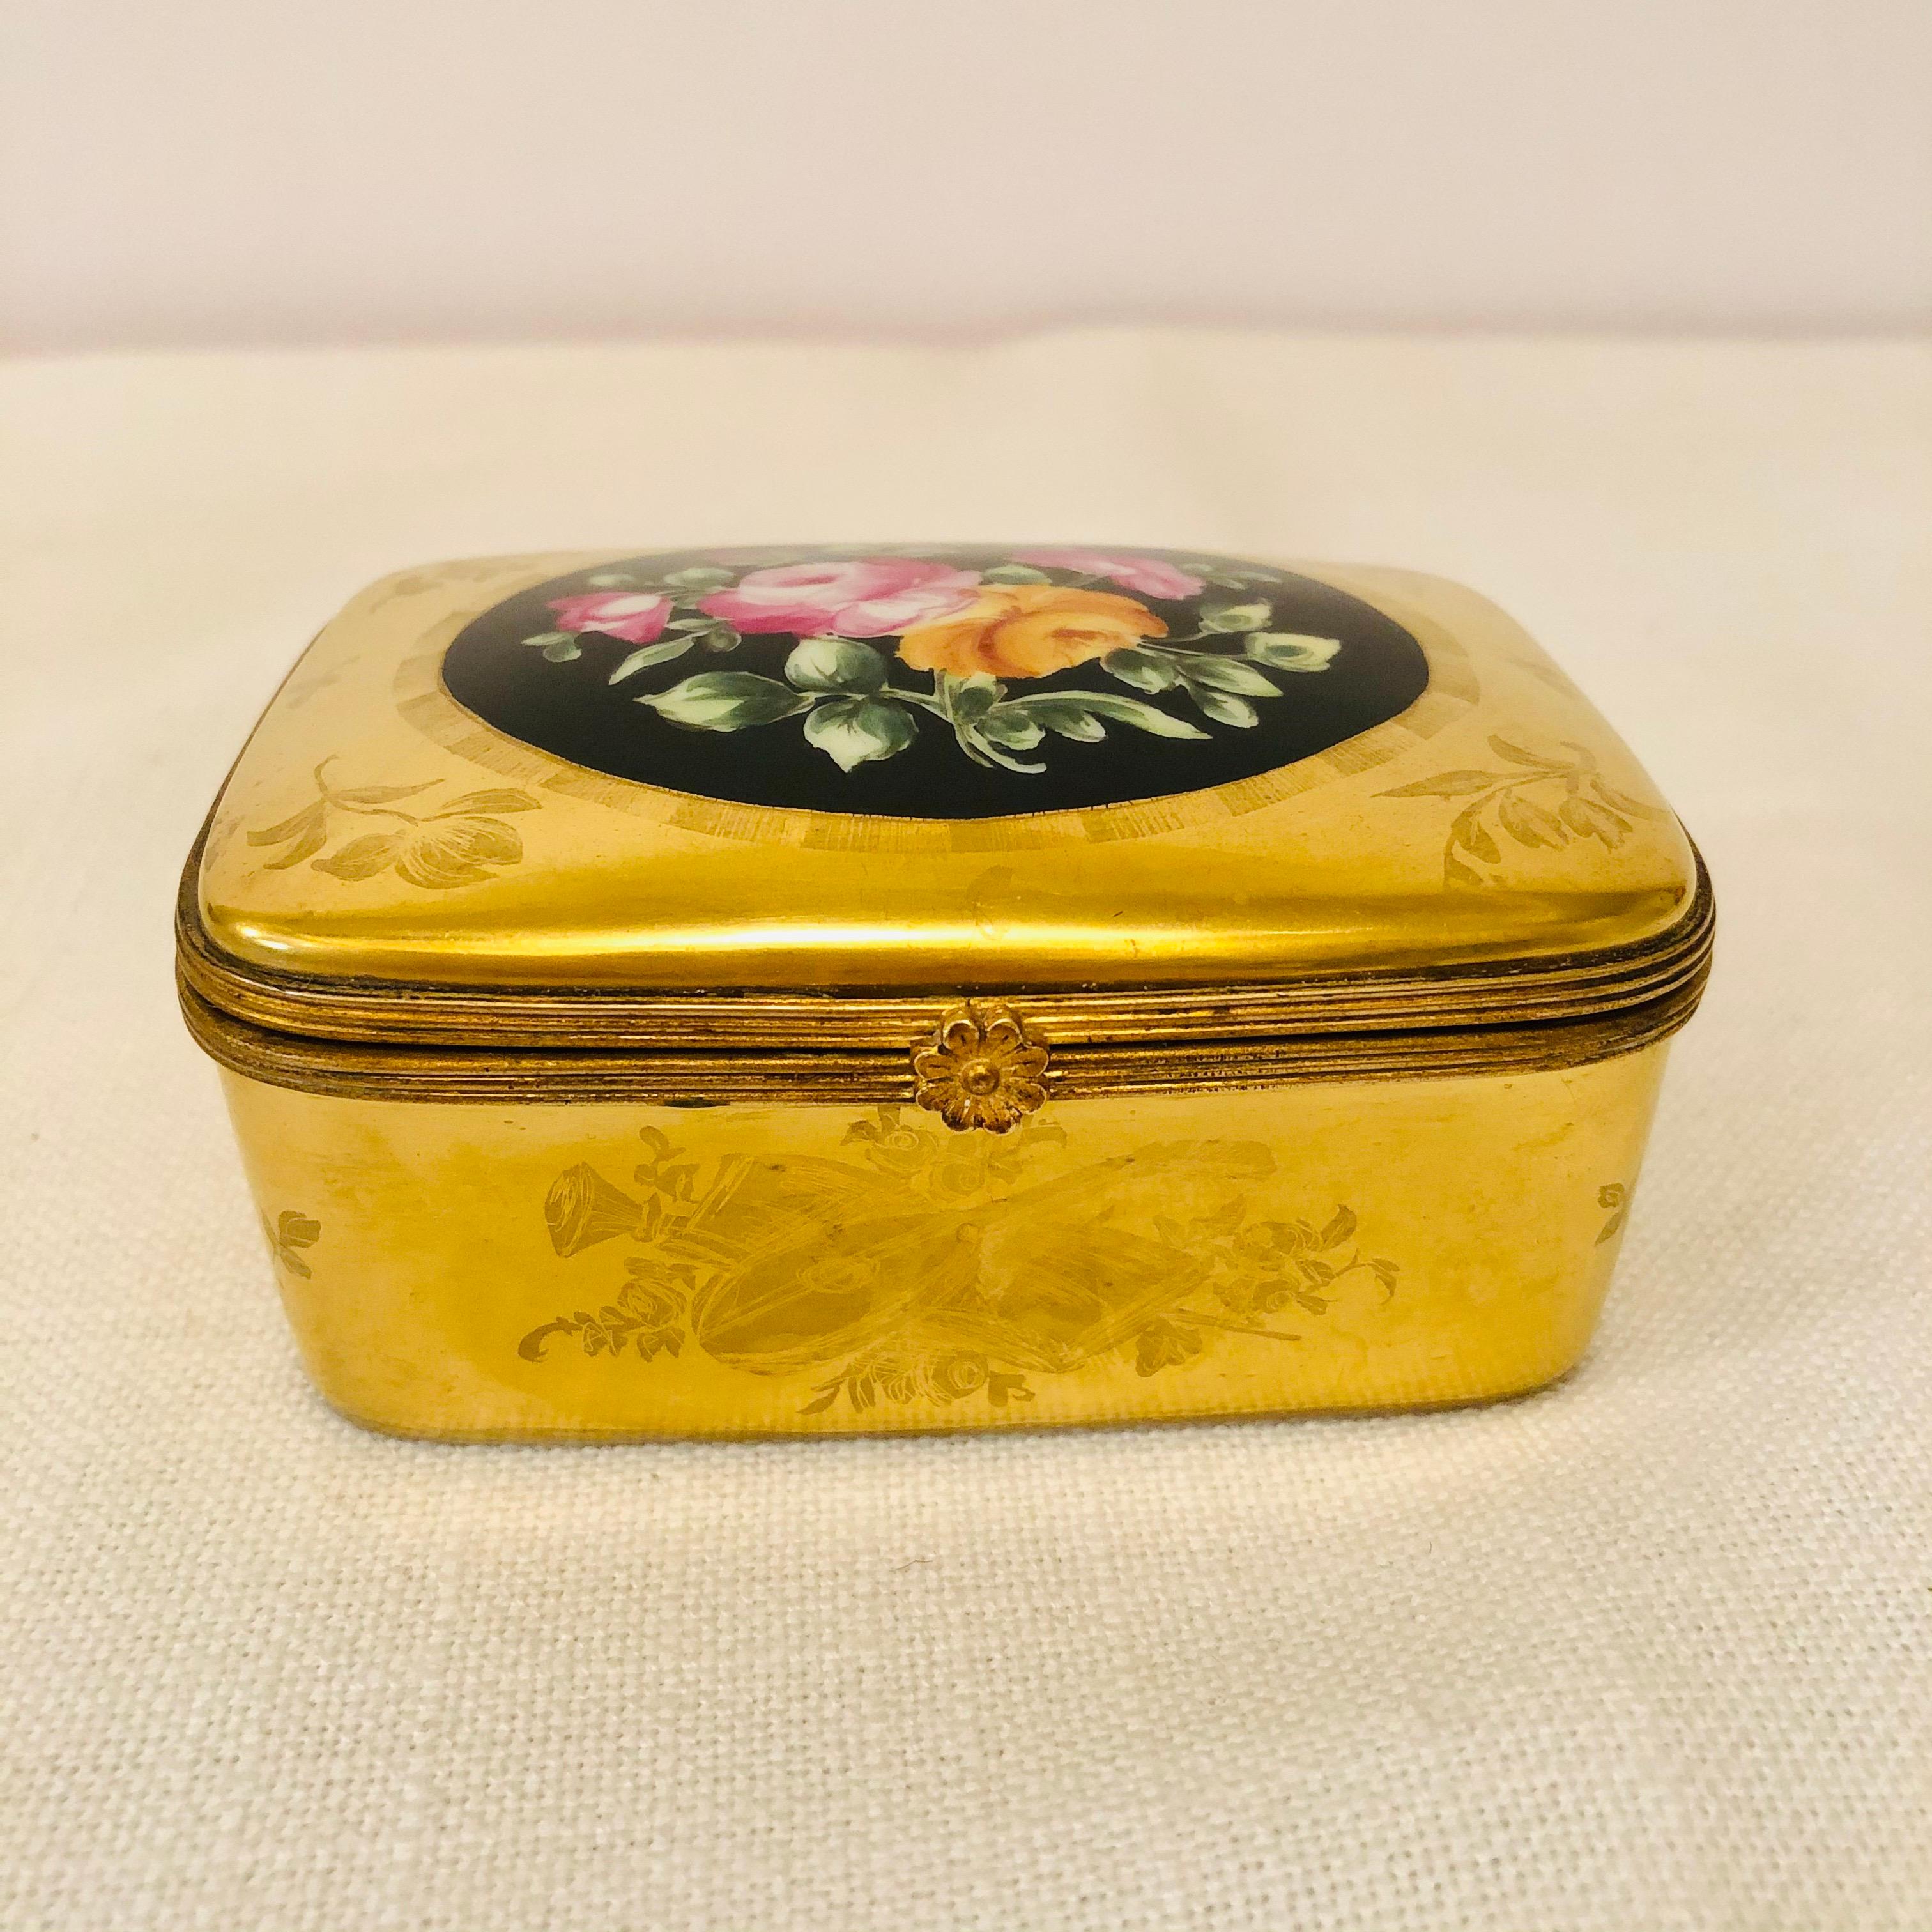 Mid-20th Century Le Tallec Box with a Gold BackGround and a Central Painting of a Flower Bouquet